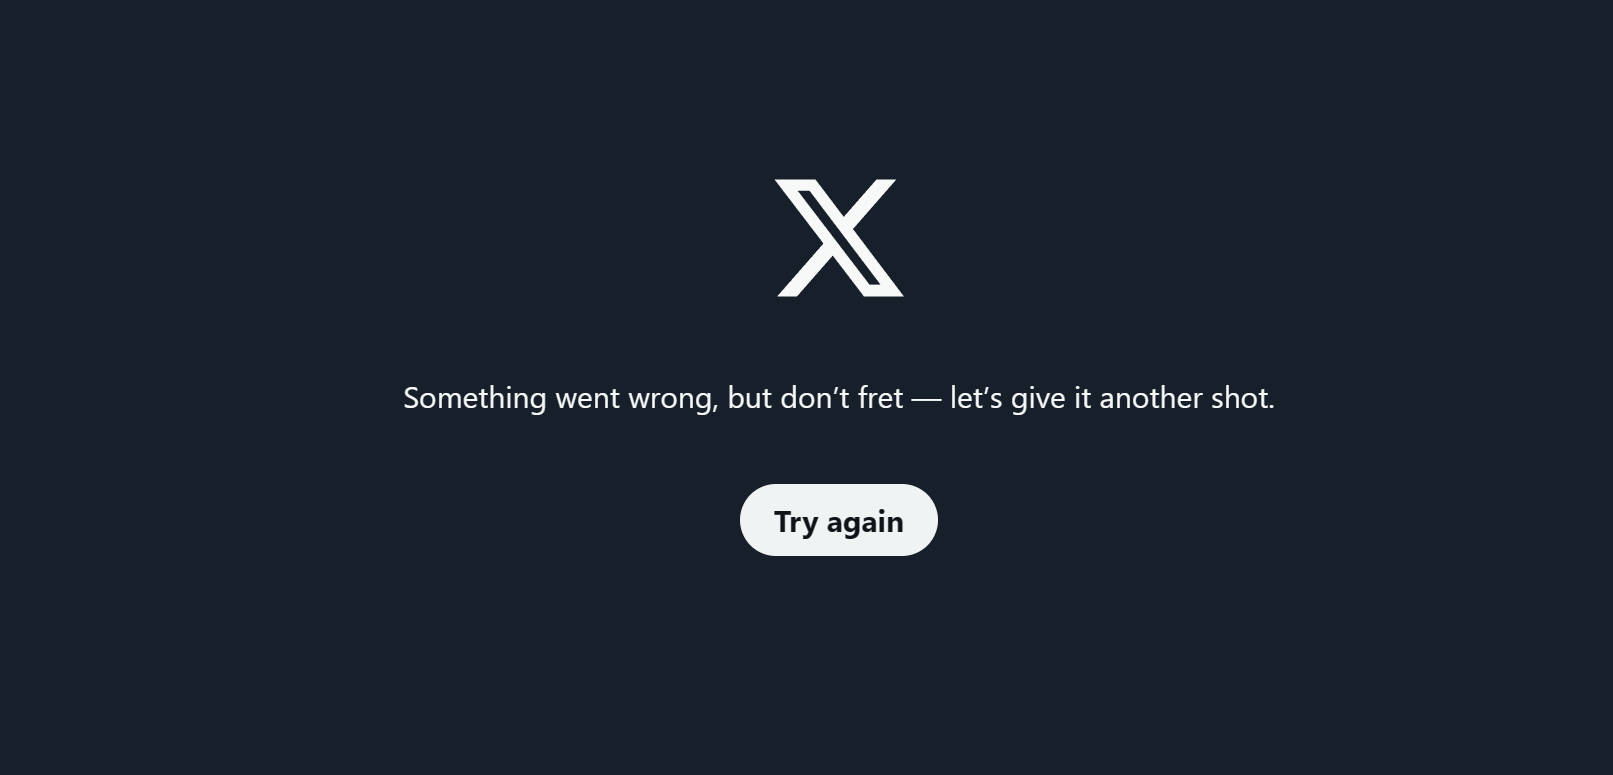 X(旧Twitter)で「Something went wrong, but don’t fret — let’s give it another shot.」と表示される場合の対処法